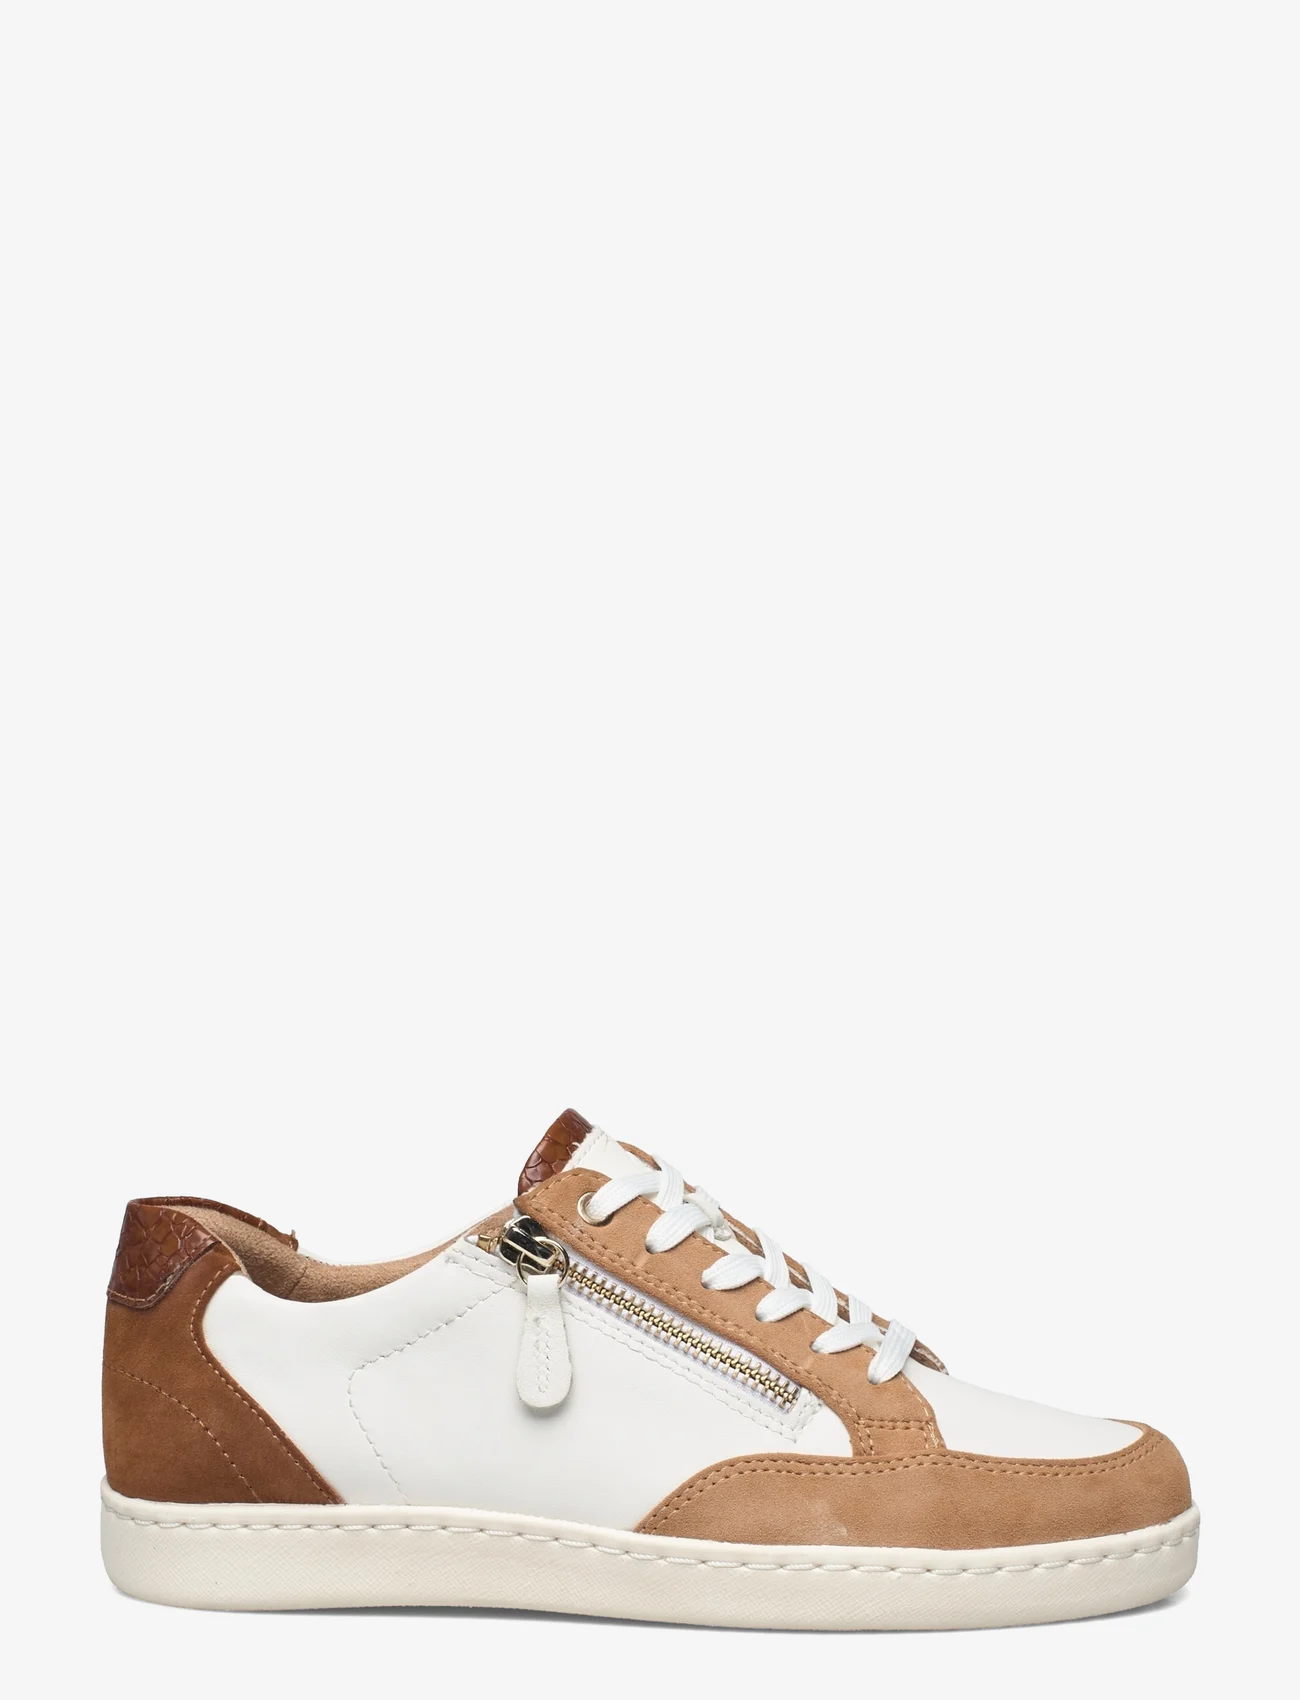 Tamaris - Woms Lace-up - niedrige sneakers - wht/almond com - 1